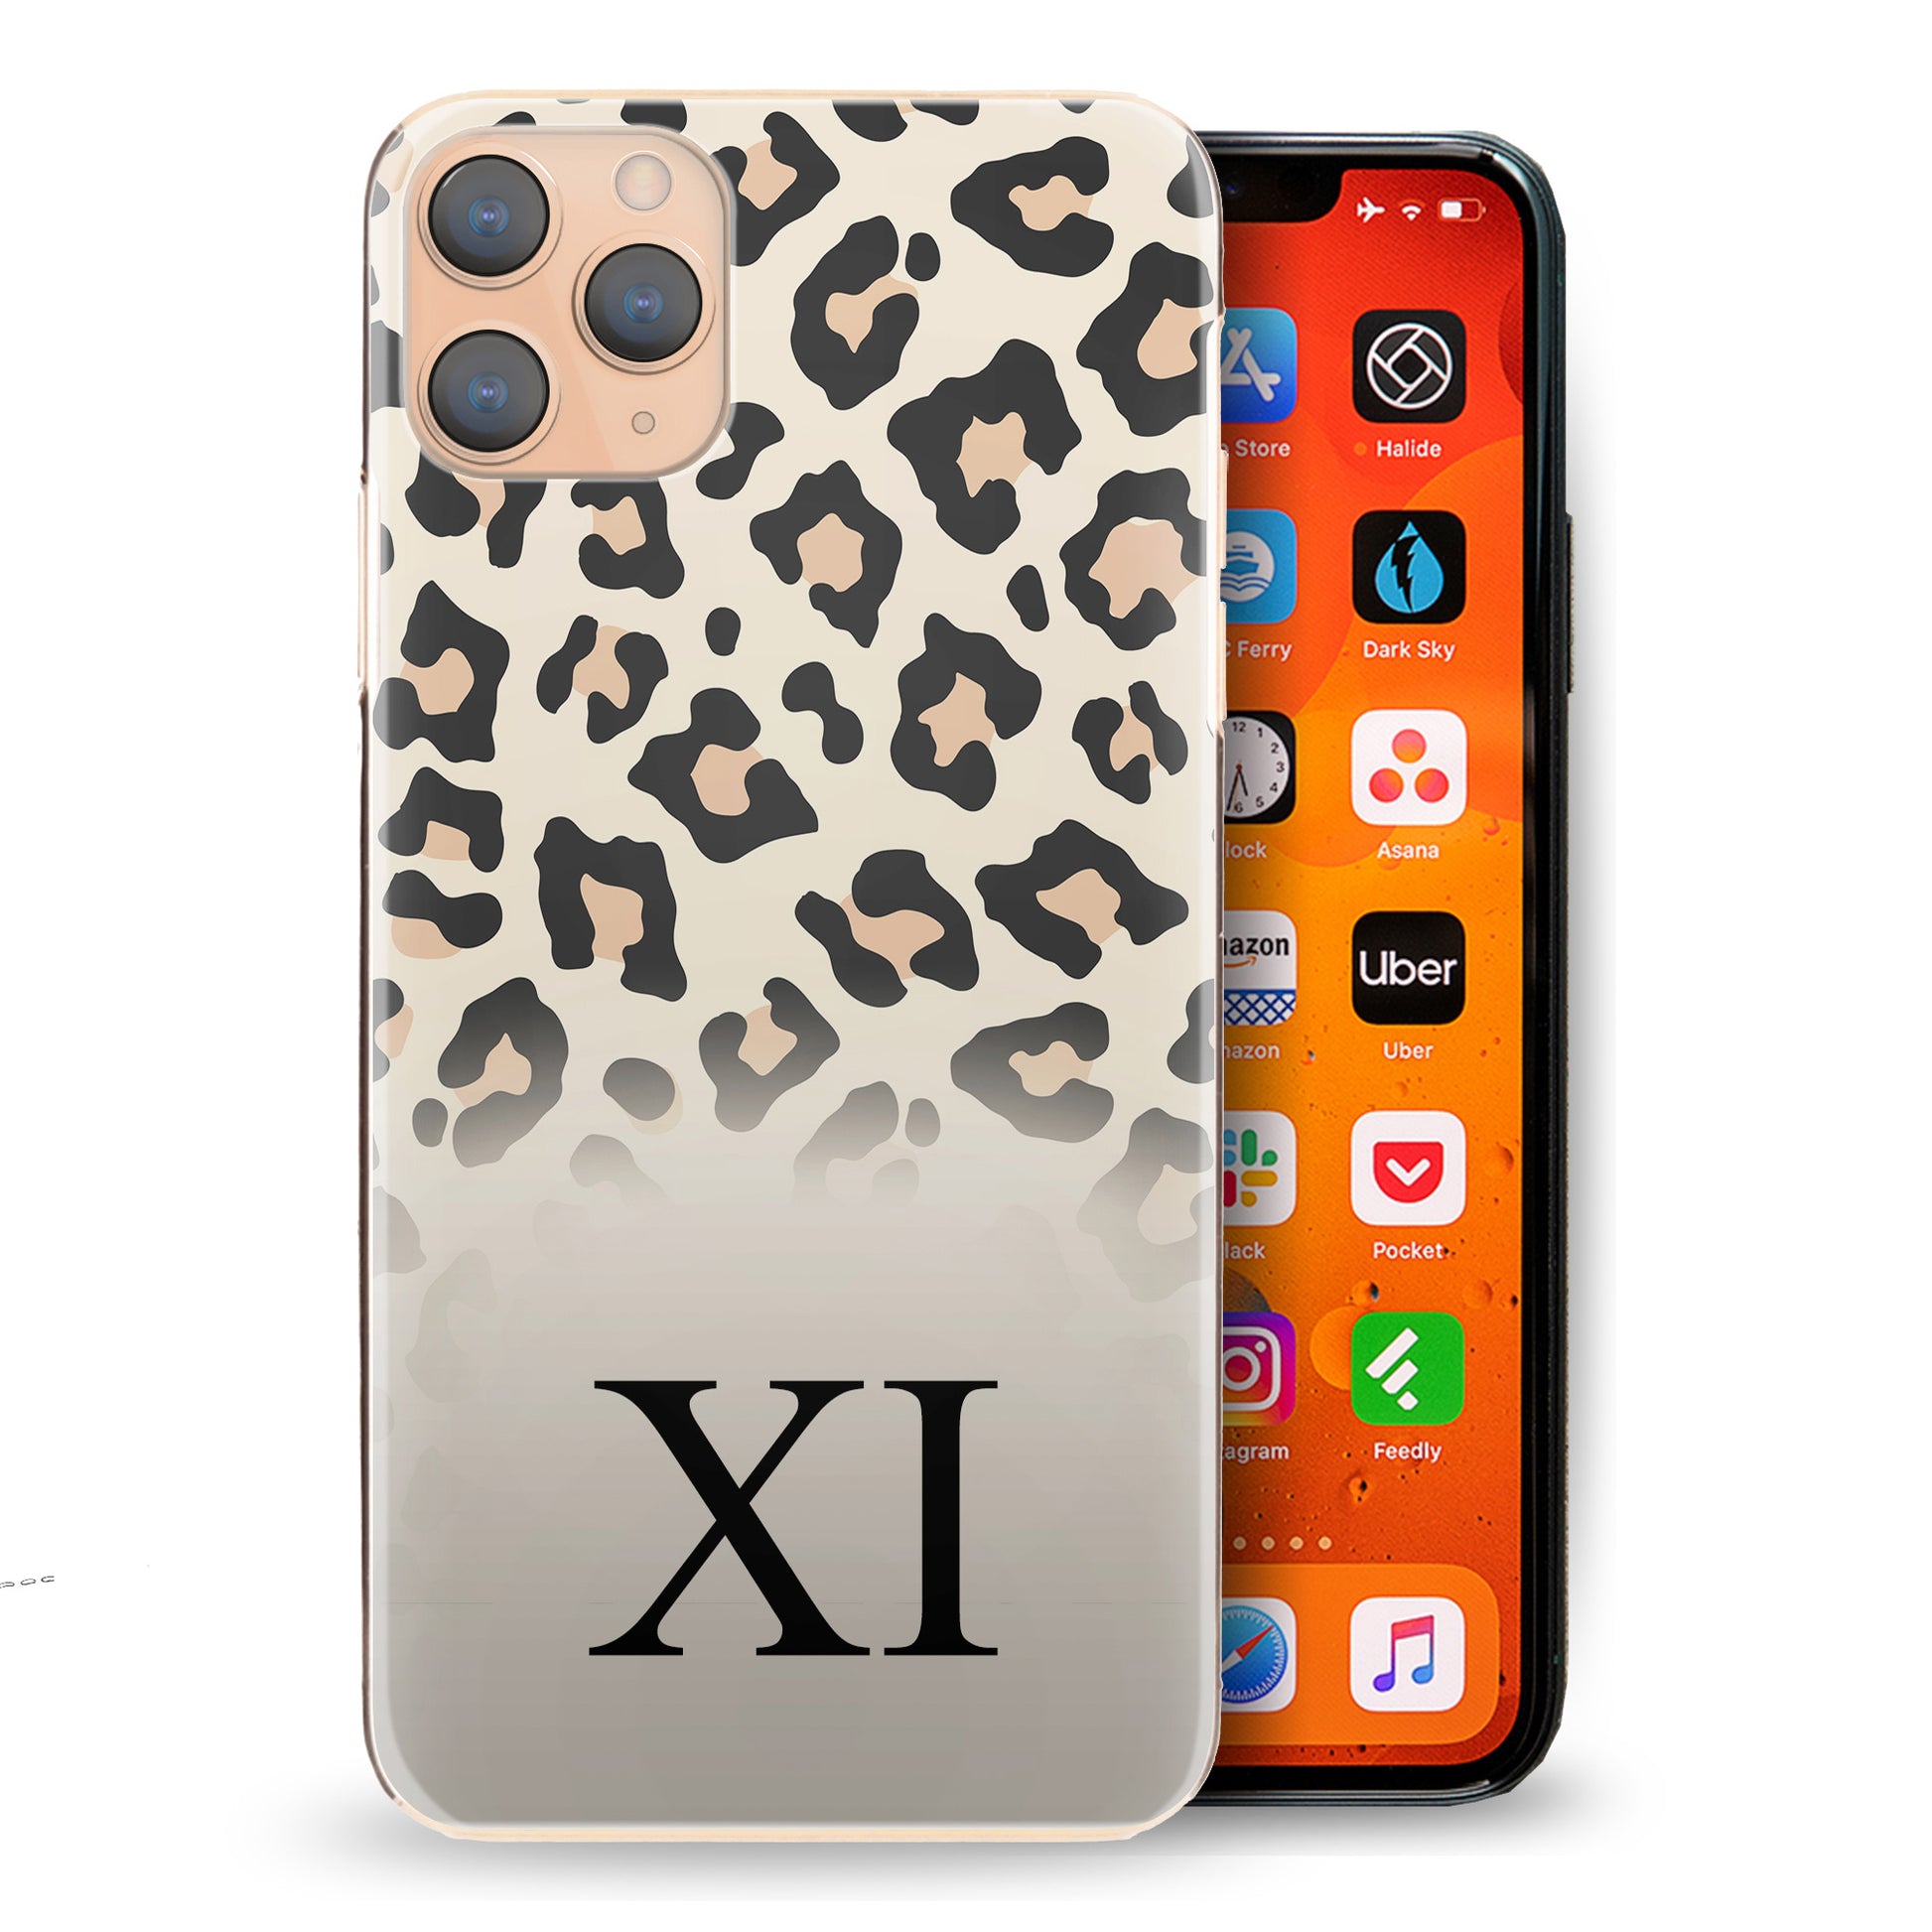 Personalised Xiaomi Phone Hard Case Black Initial on White Leopard Print